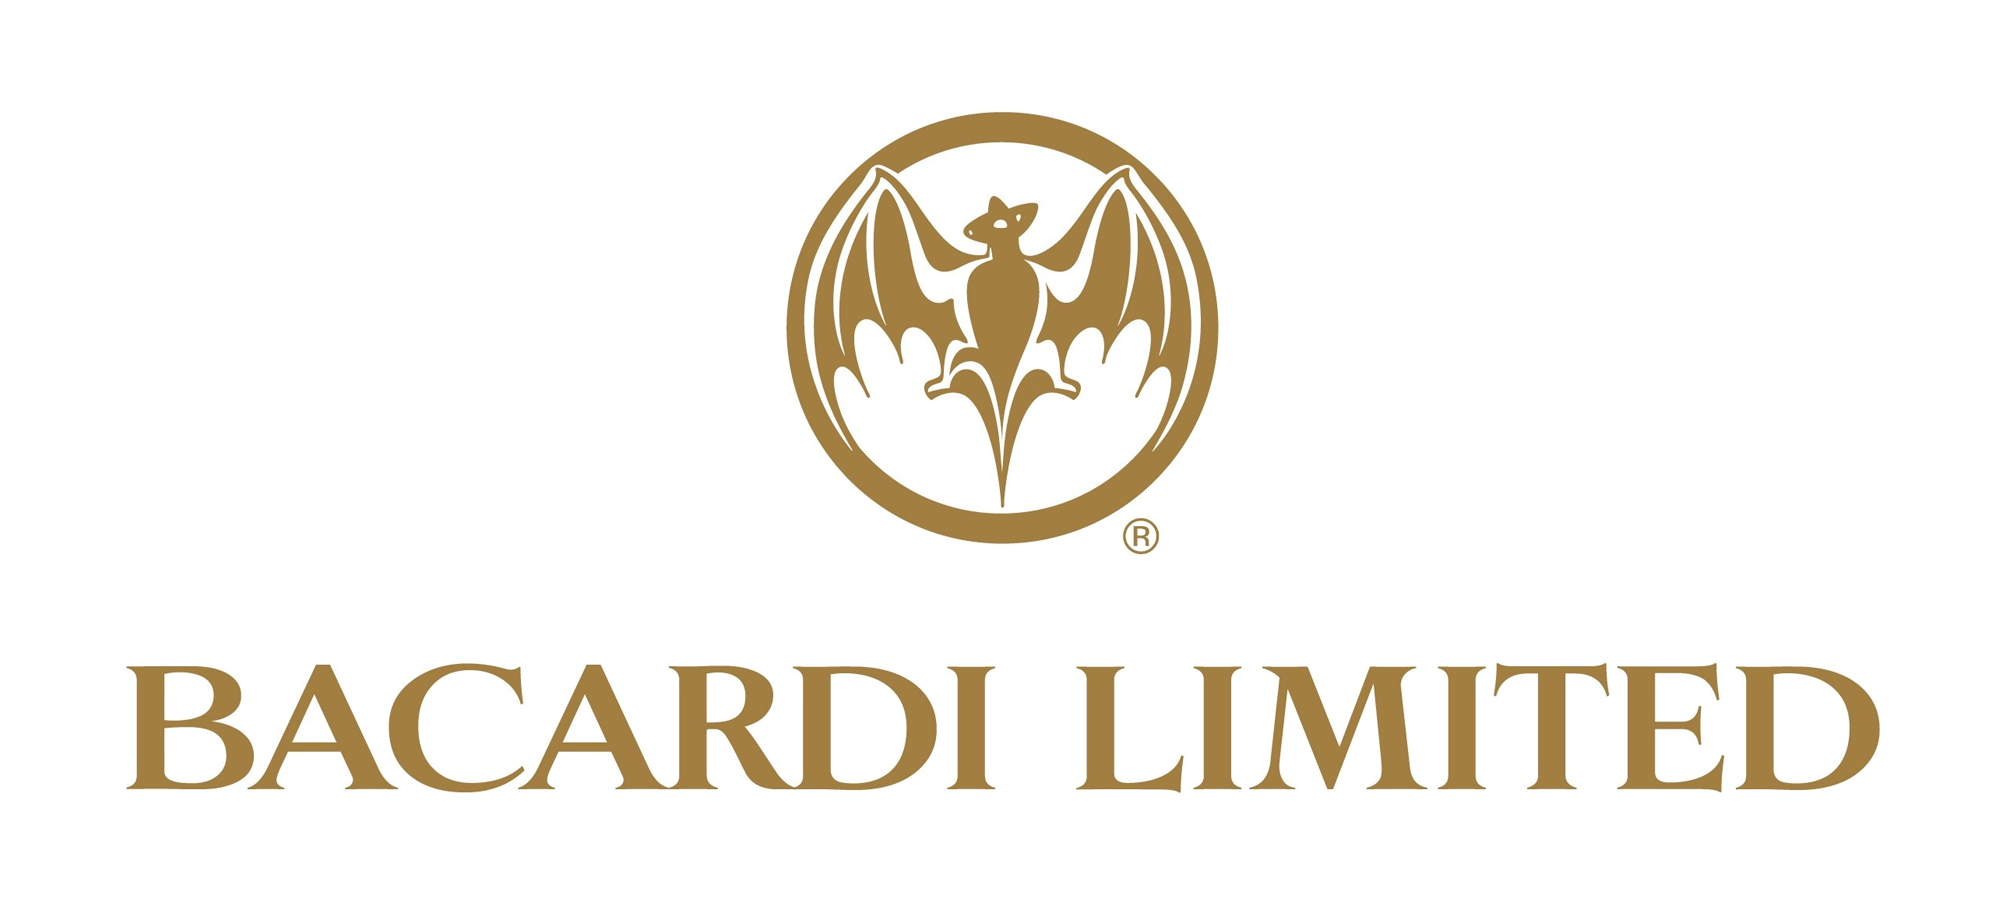 Bacardi Limited Png - File:bacardi Limited Logo.png, Transparent background PNG HD thumbnail